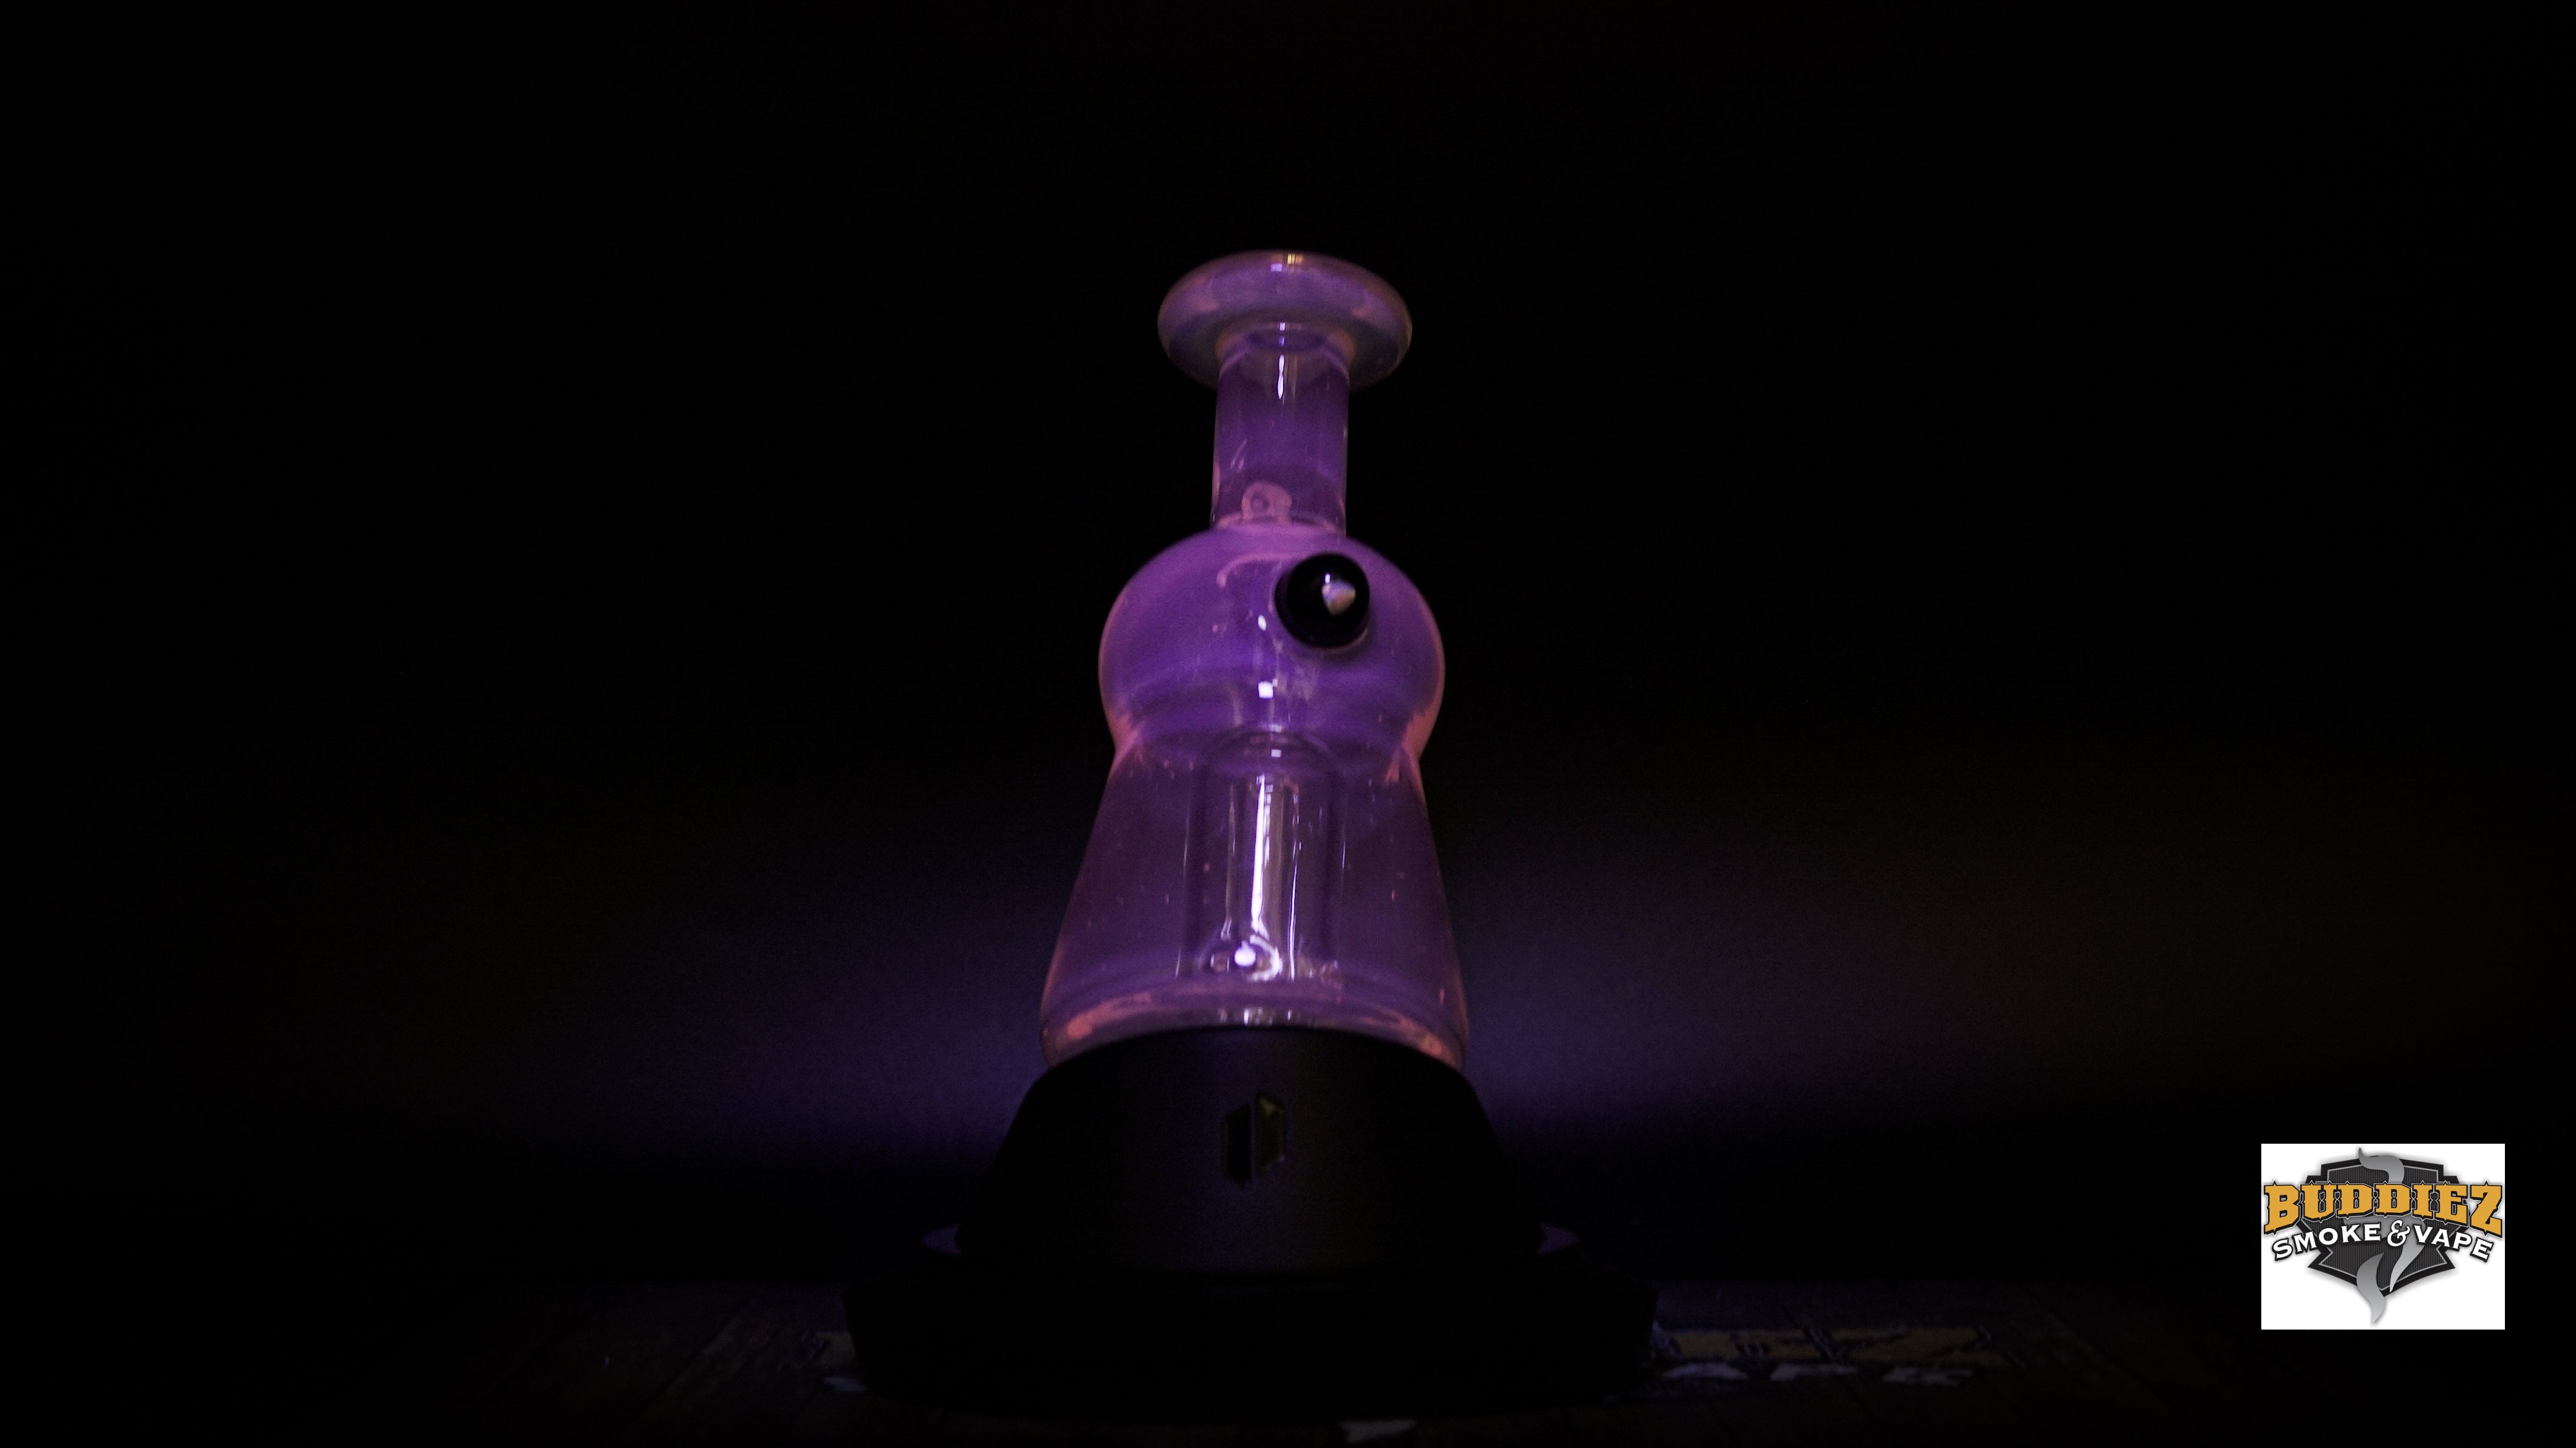 Puffco attachment By Ajsurfcitytubes